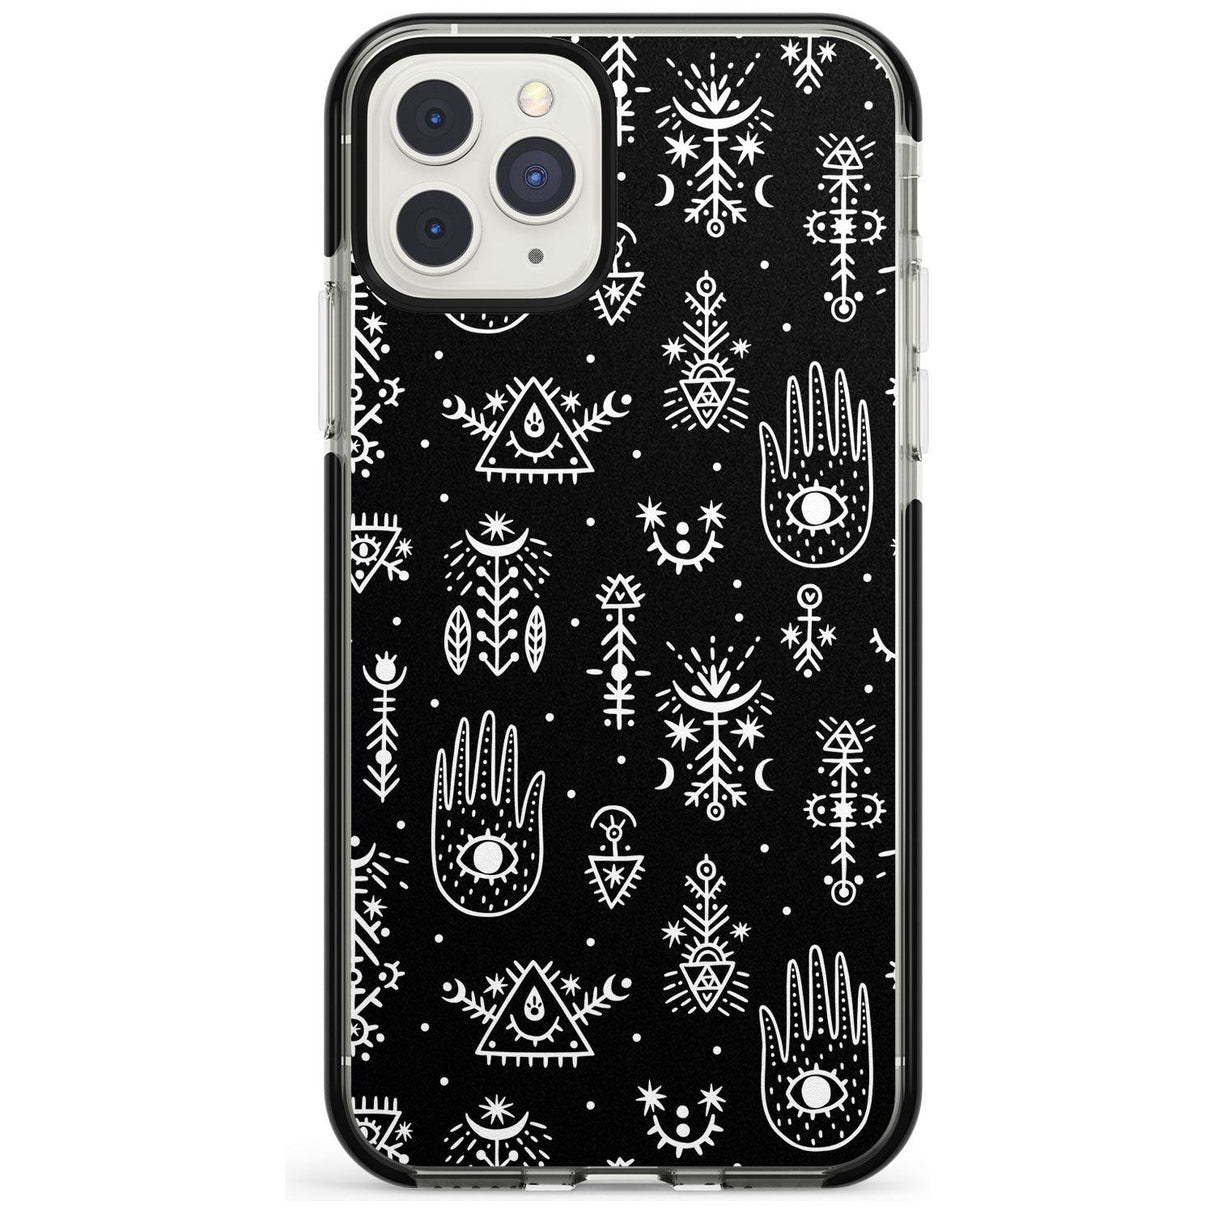 Tribal Palms - White on Black Black Impact Phone Case for iPhone 11 Pro Max